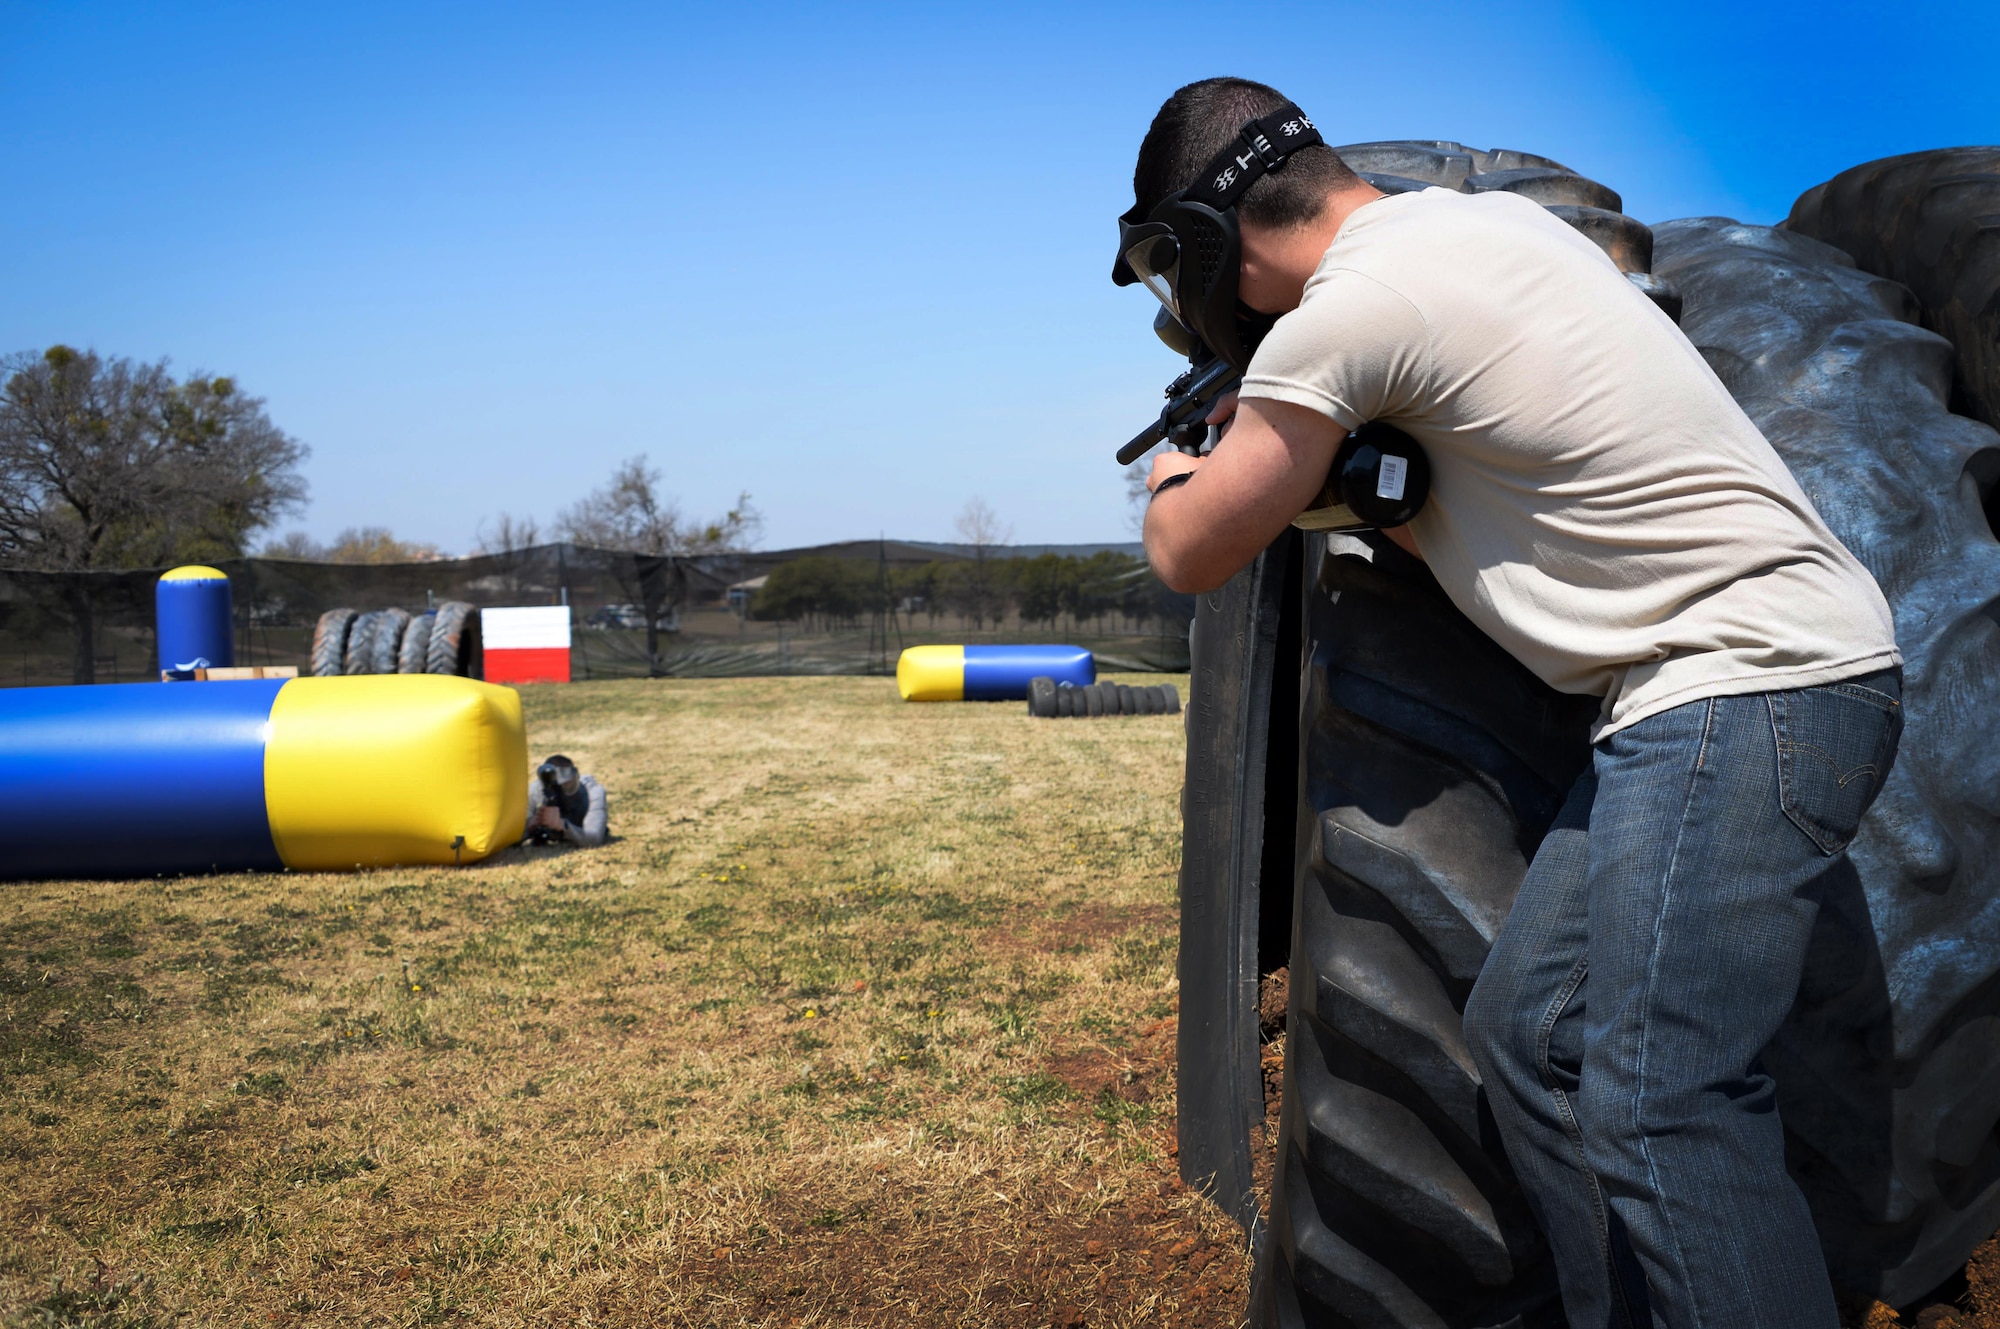 Airmen-in-Training at Sheppard Air Force Base, Texas, take some of the first shots at the paintball arena at Wind Creek Park shortly after its grand opening March 15, 2017. The paintball facility will be open on Saturday’s from 12 p.m. to 5 p.m. Participants are allowed to bring their own gear but must purchase paintballs from Outdoor Recreation. (U.S. Air Force photo by Senior Airman Robert L. McIlrath/Released)

Package Deals-
$20 Rental Package includes a Marker, Mask, all day tank refill and a Field fee. 
$40 Rental Package includes a Marker, Mask, All day tank refill, field fee and 1 thousand paintballs. 

Miscellaneous Rental Fees-
Field Fee- $5
Mask- $5
Marker- $10
All Day Air - $5

Paintballs-
500 Paintballs -$14
1000 Paintballs -$28
2000 Paintballs - $40


Acceptable payment methods are cash, check and Visa or Mastercard.

All questions pertaining to the dog park or paintball facility can be vetted through Outdoor Recreation at 940-676-4141.
